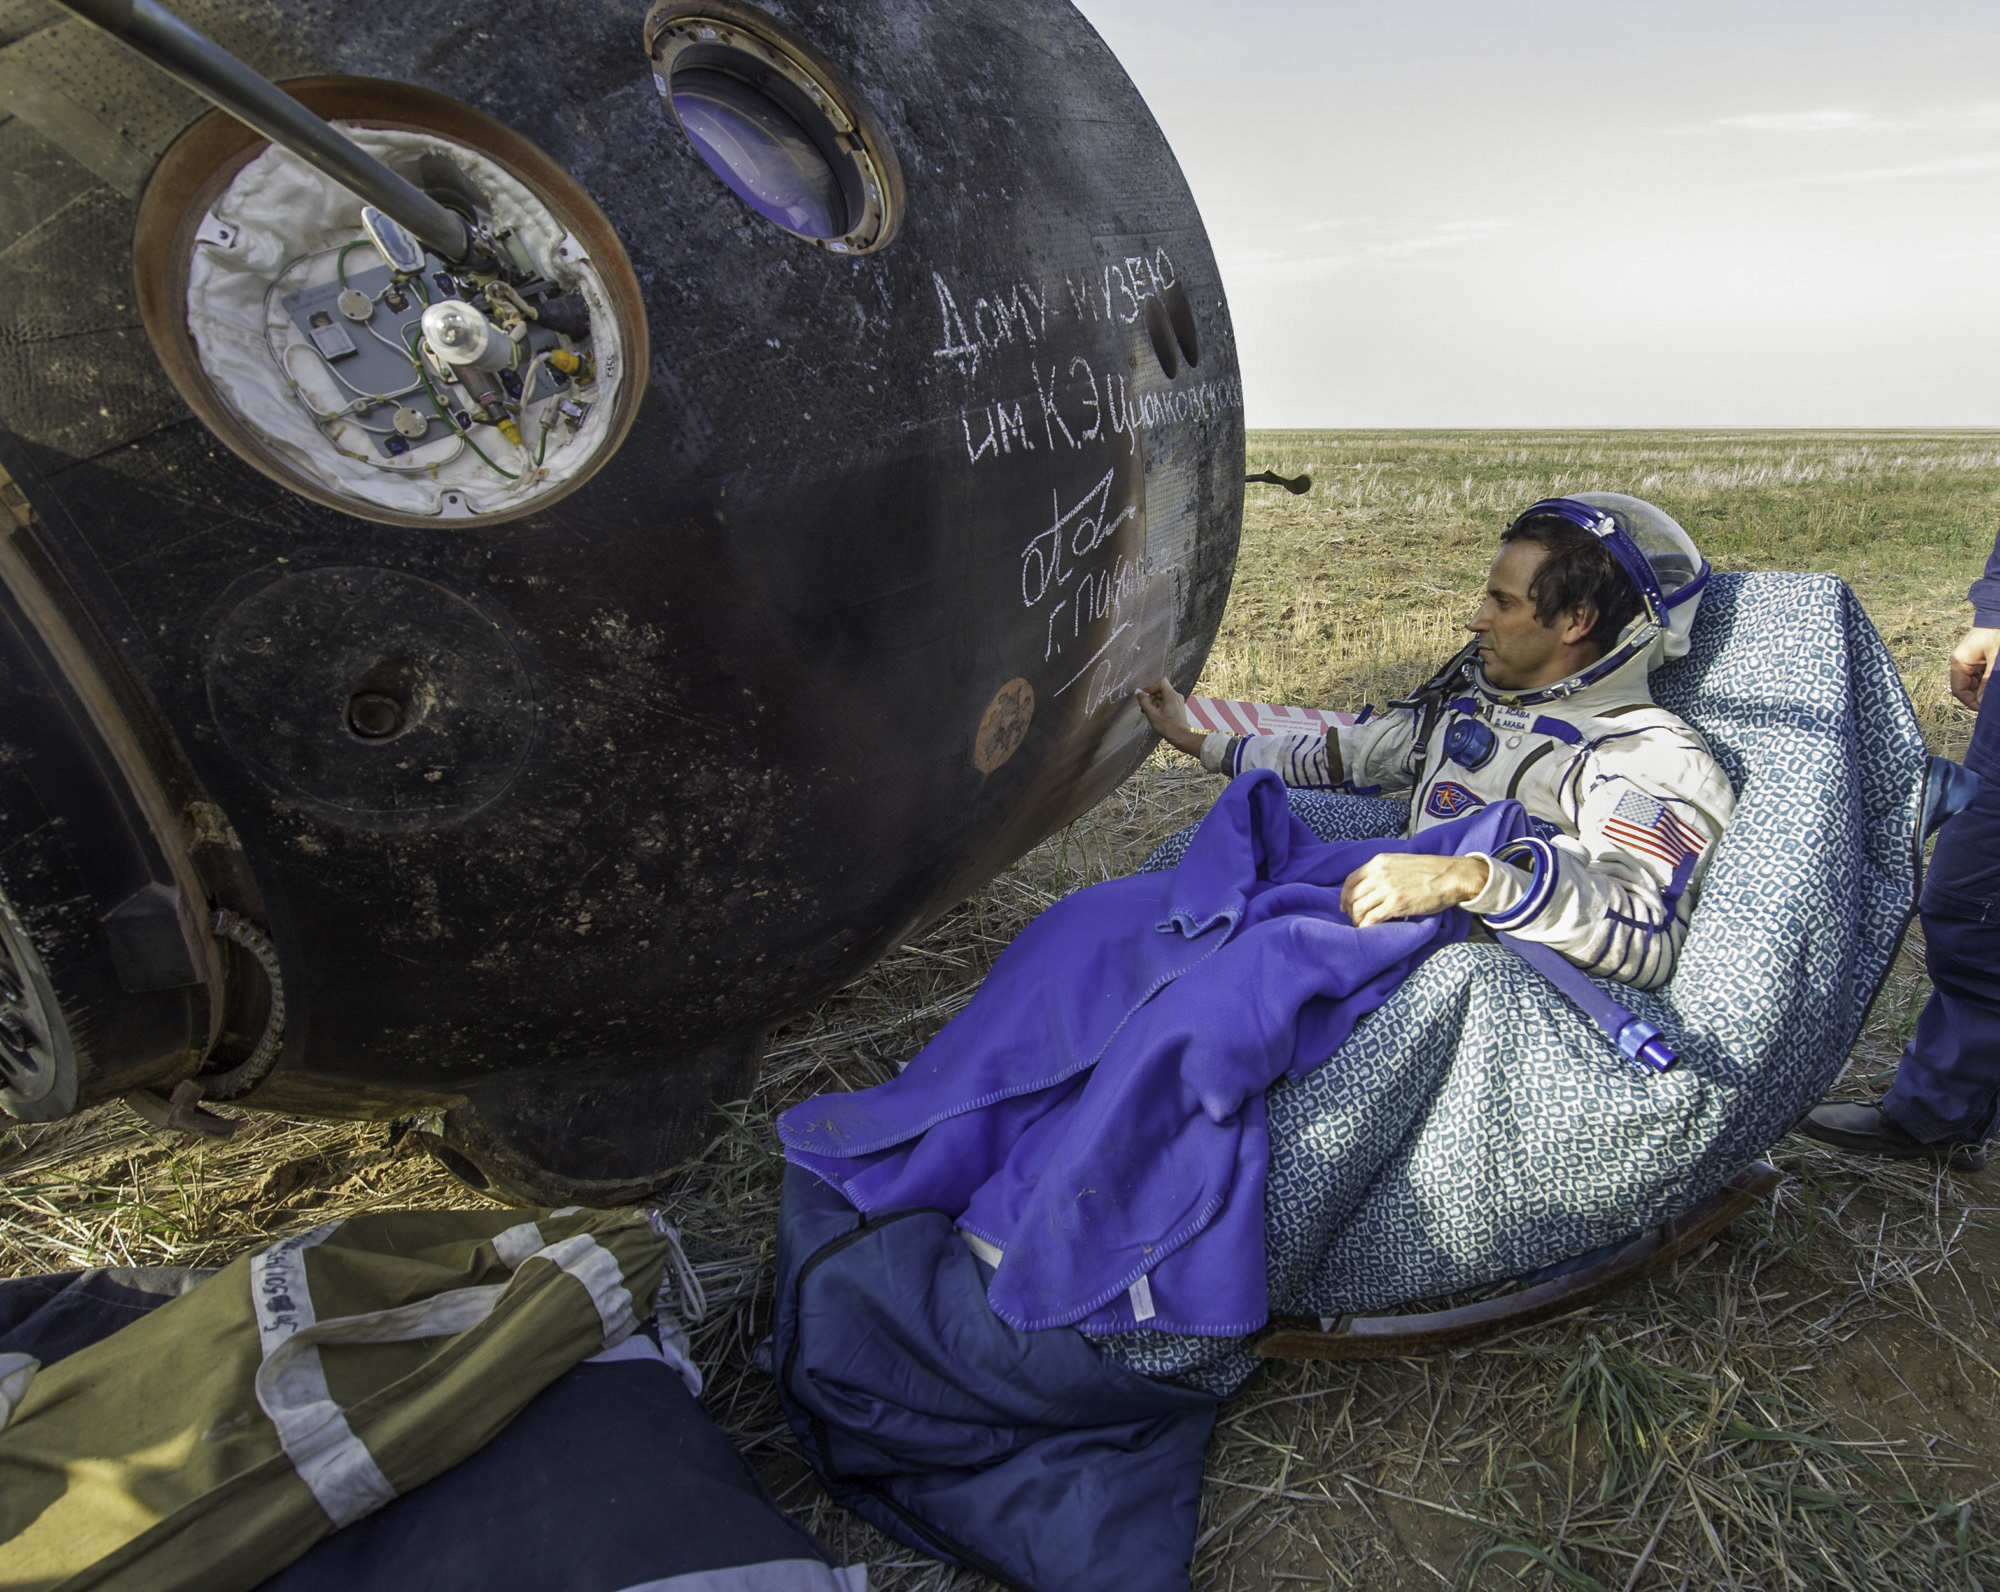  Expedition 32 NASA Flight Engineer signs the side of his Soyuz TMA-04M spacecraft shortly after he landed with his crew mates Expedition 32 Commander Gennady Padalka and Flight Engineer Sergei Revin of Russia in a remote area near the town of Arkaly